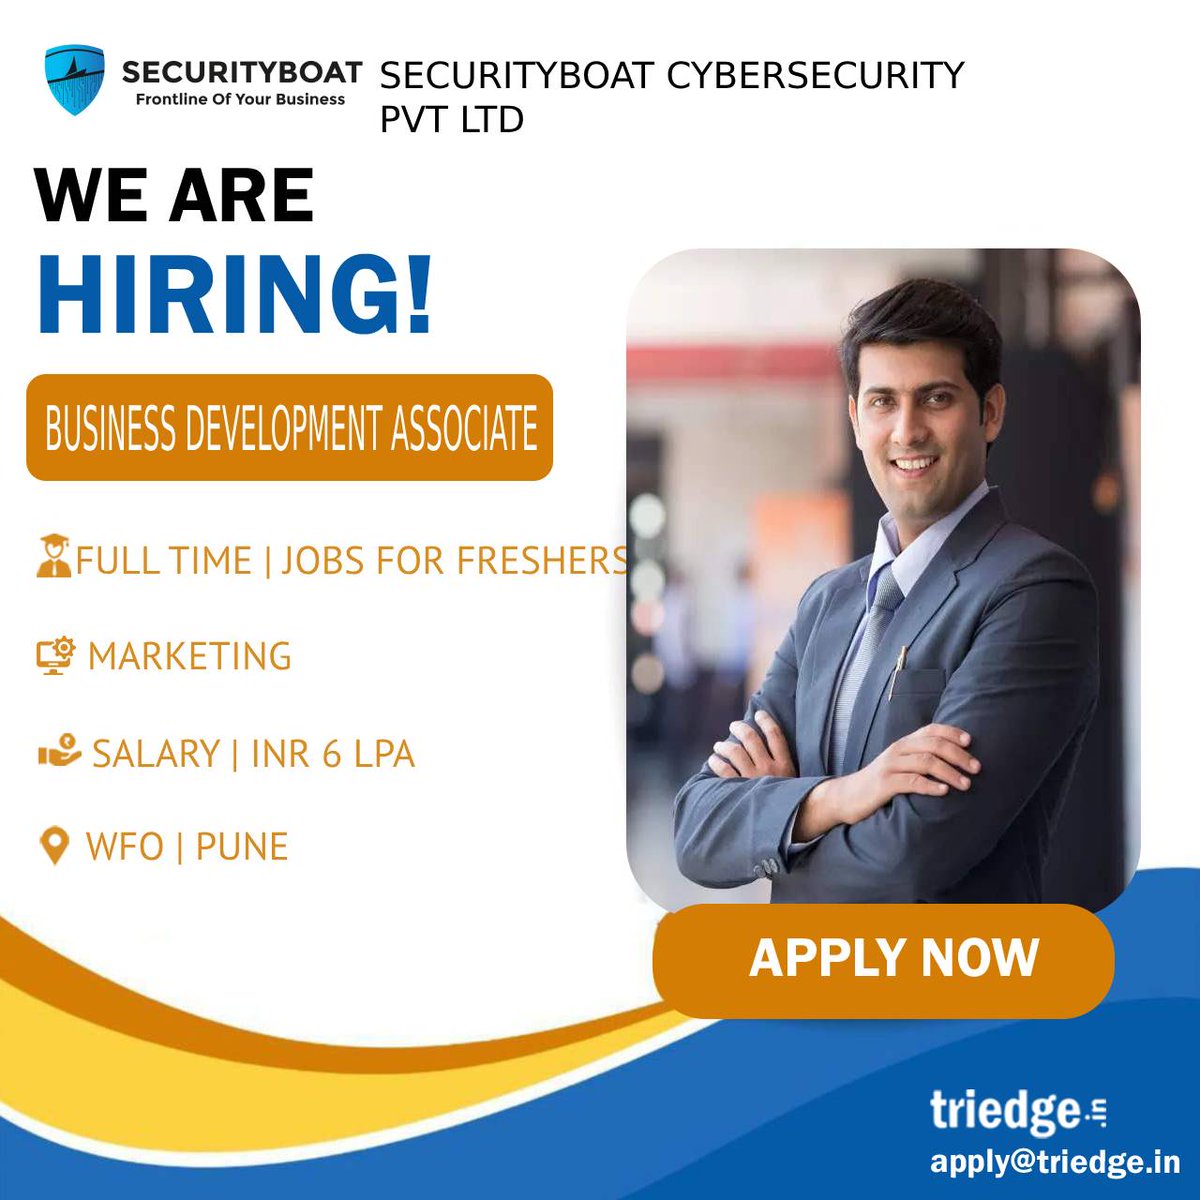 Securityboat Cubersecurity Pvt Ltd is providing opportunities for the role of Business Development Associate. 

Apply with your resume at apply@triedge.in.